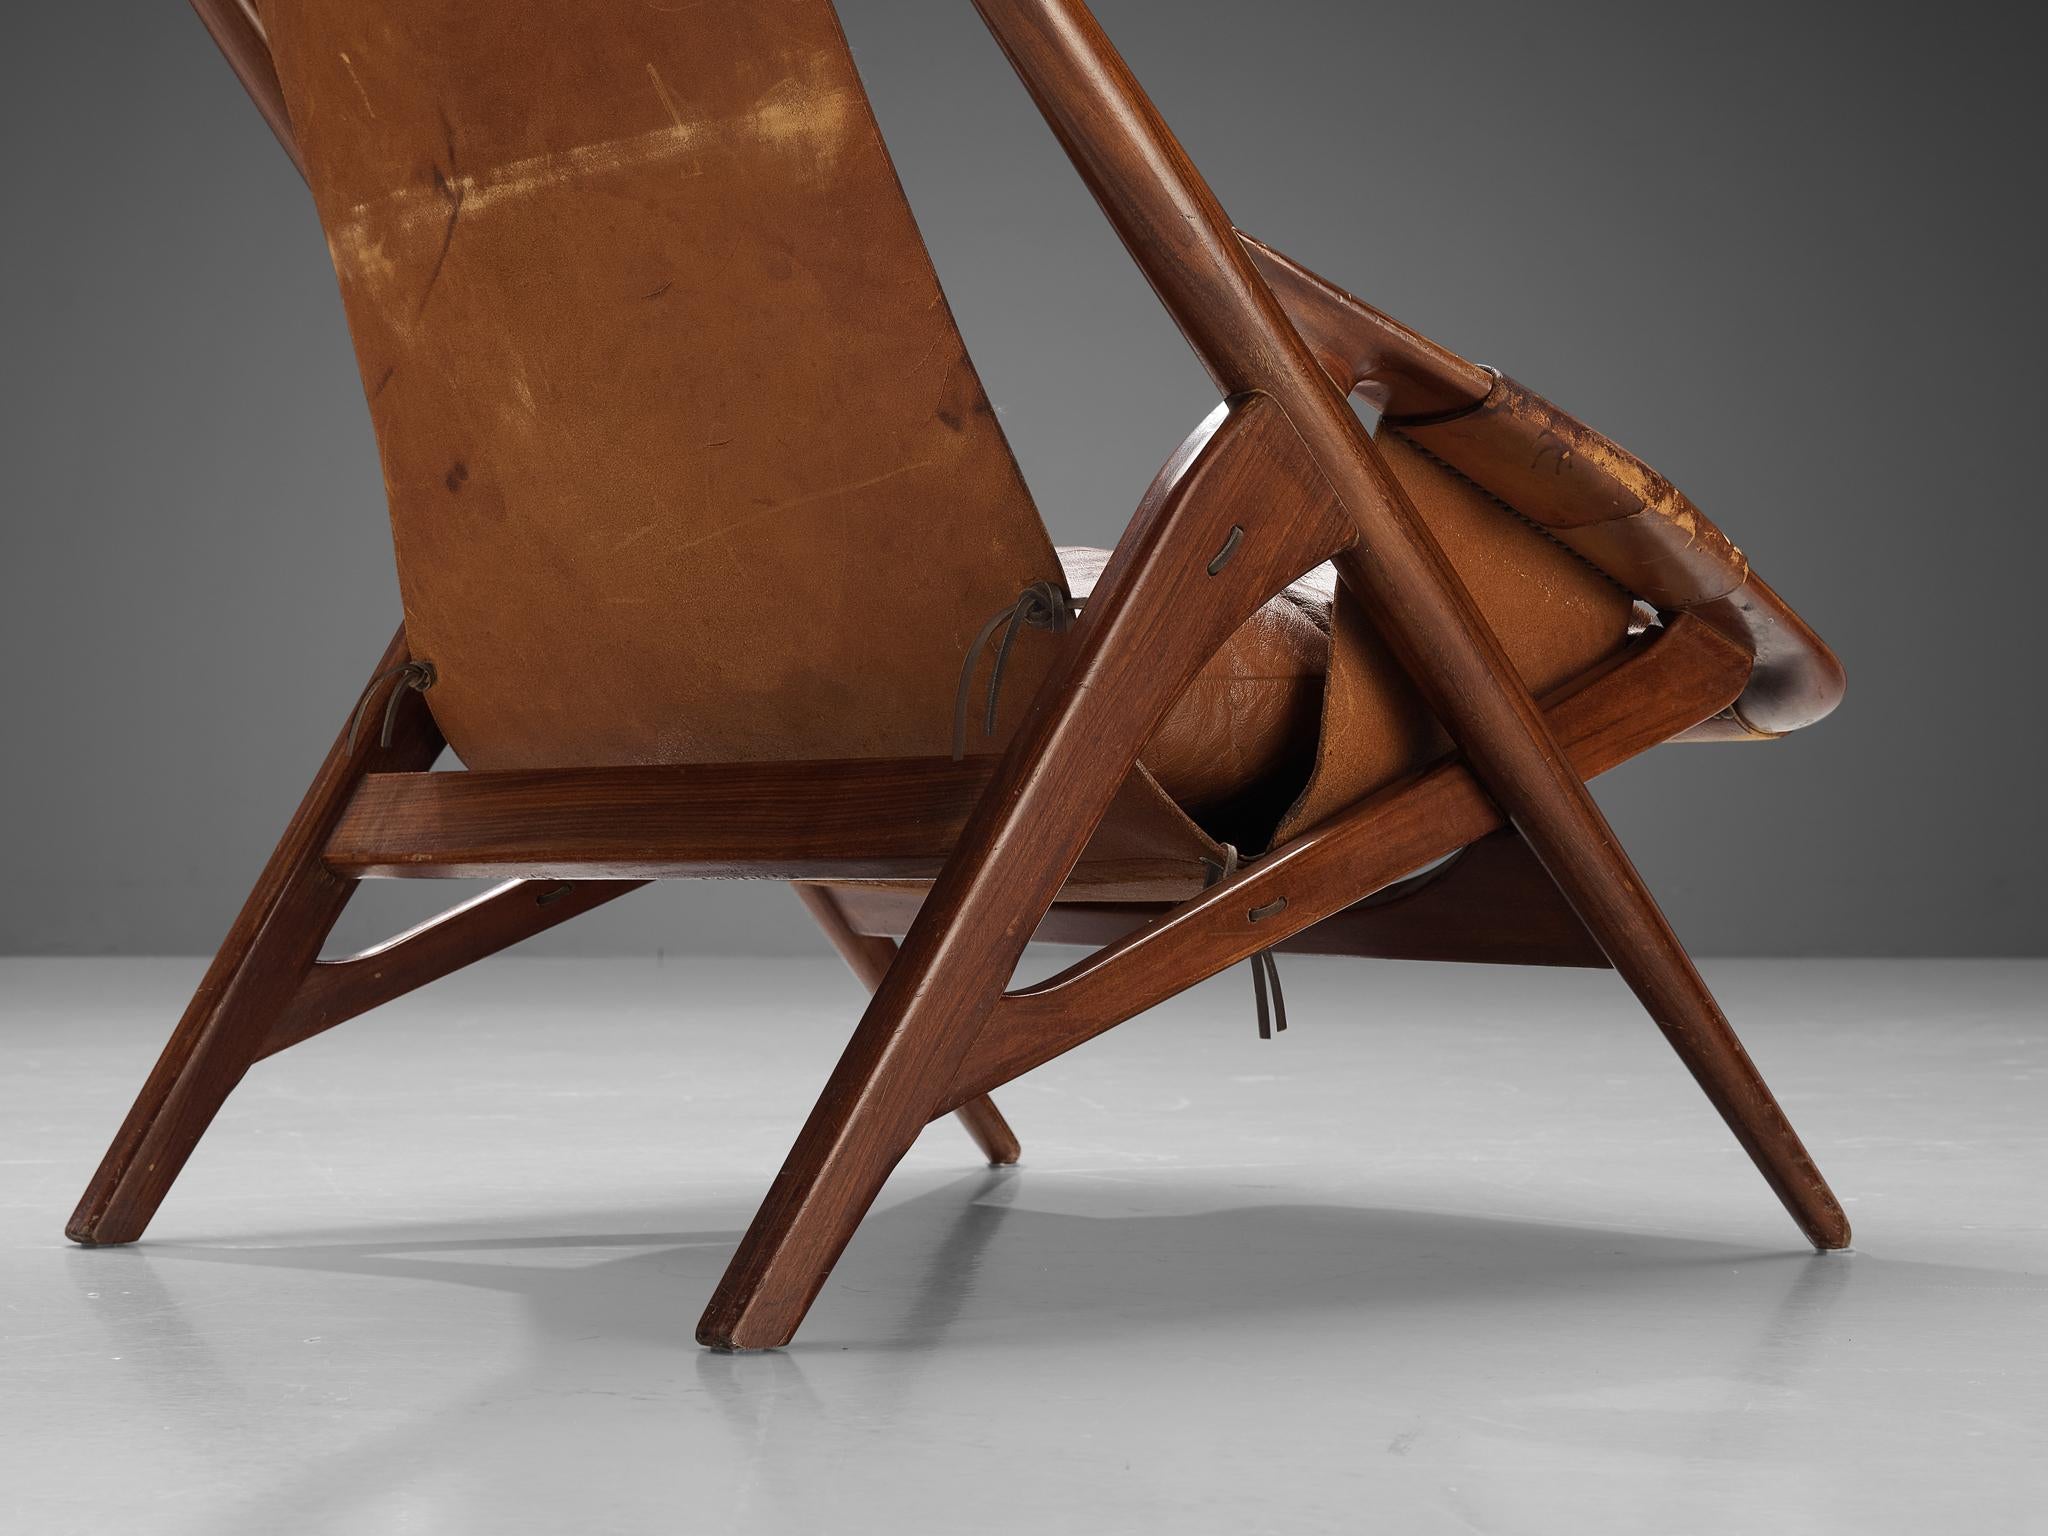 W. Andersag Lounge Chair in Patinated Leather and Teak